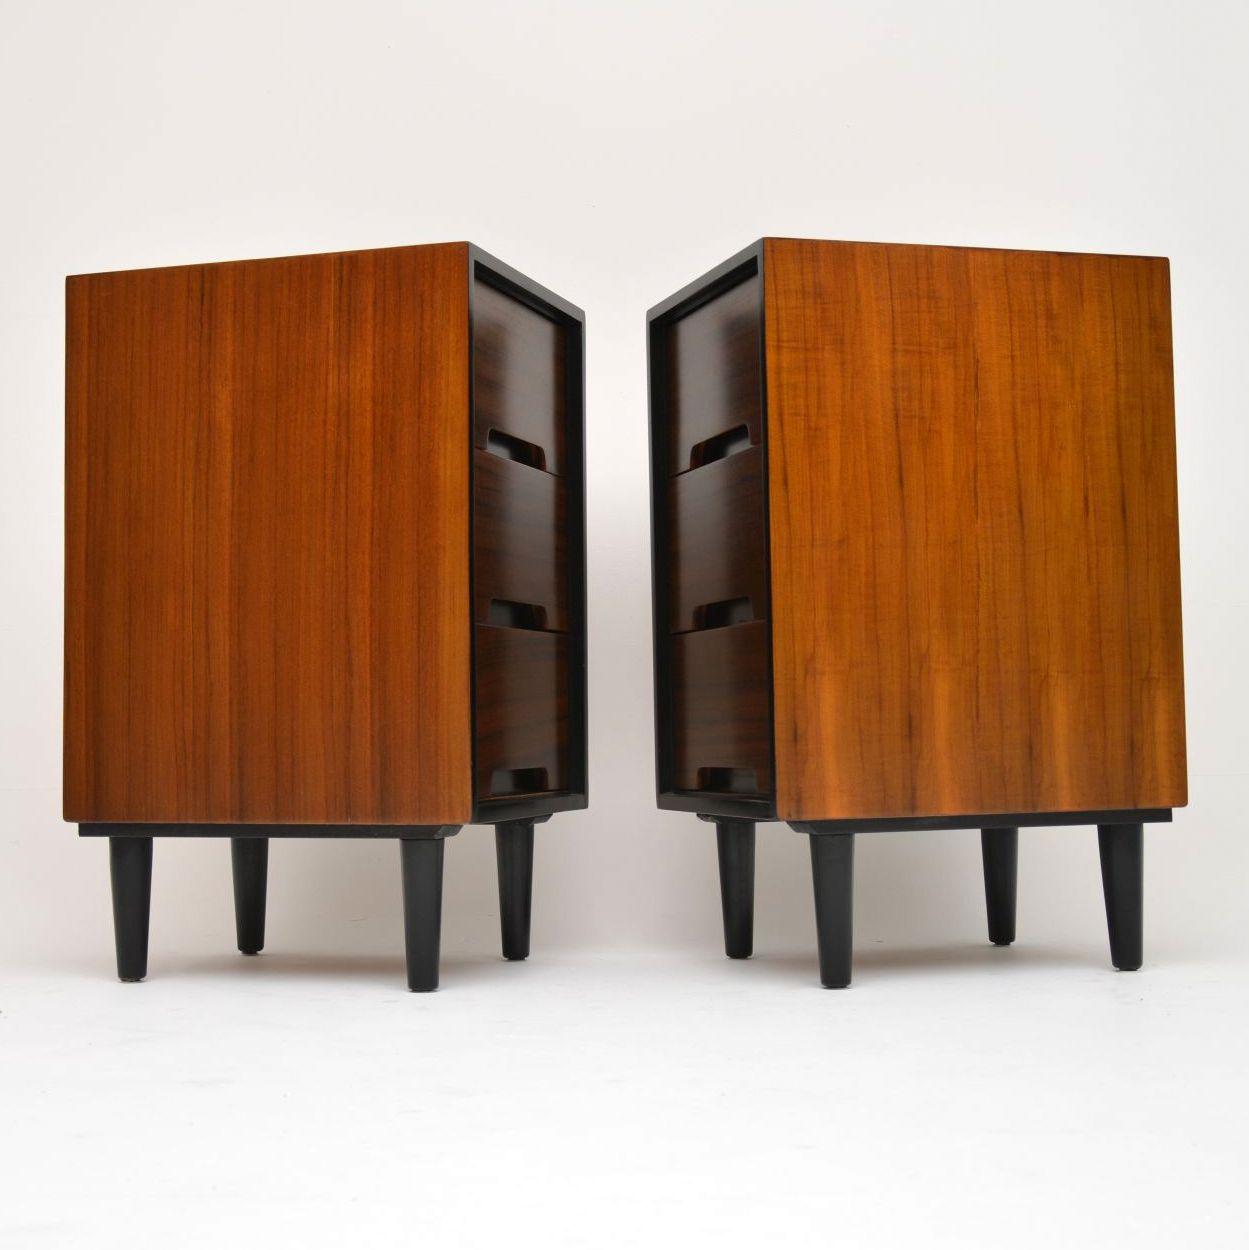 English 1950s Pair of Walnut Bedside Chests by John & Sylvia Reid for Stag